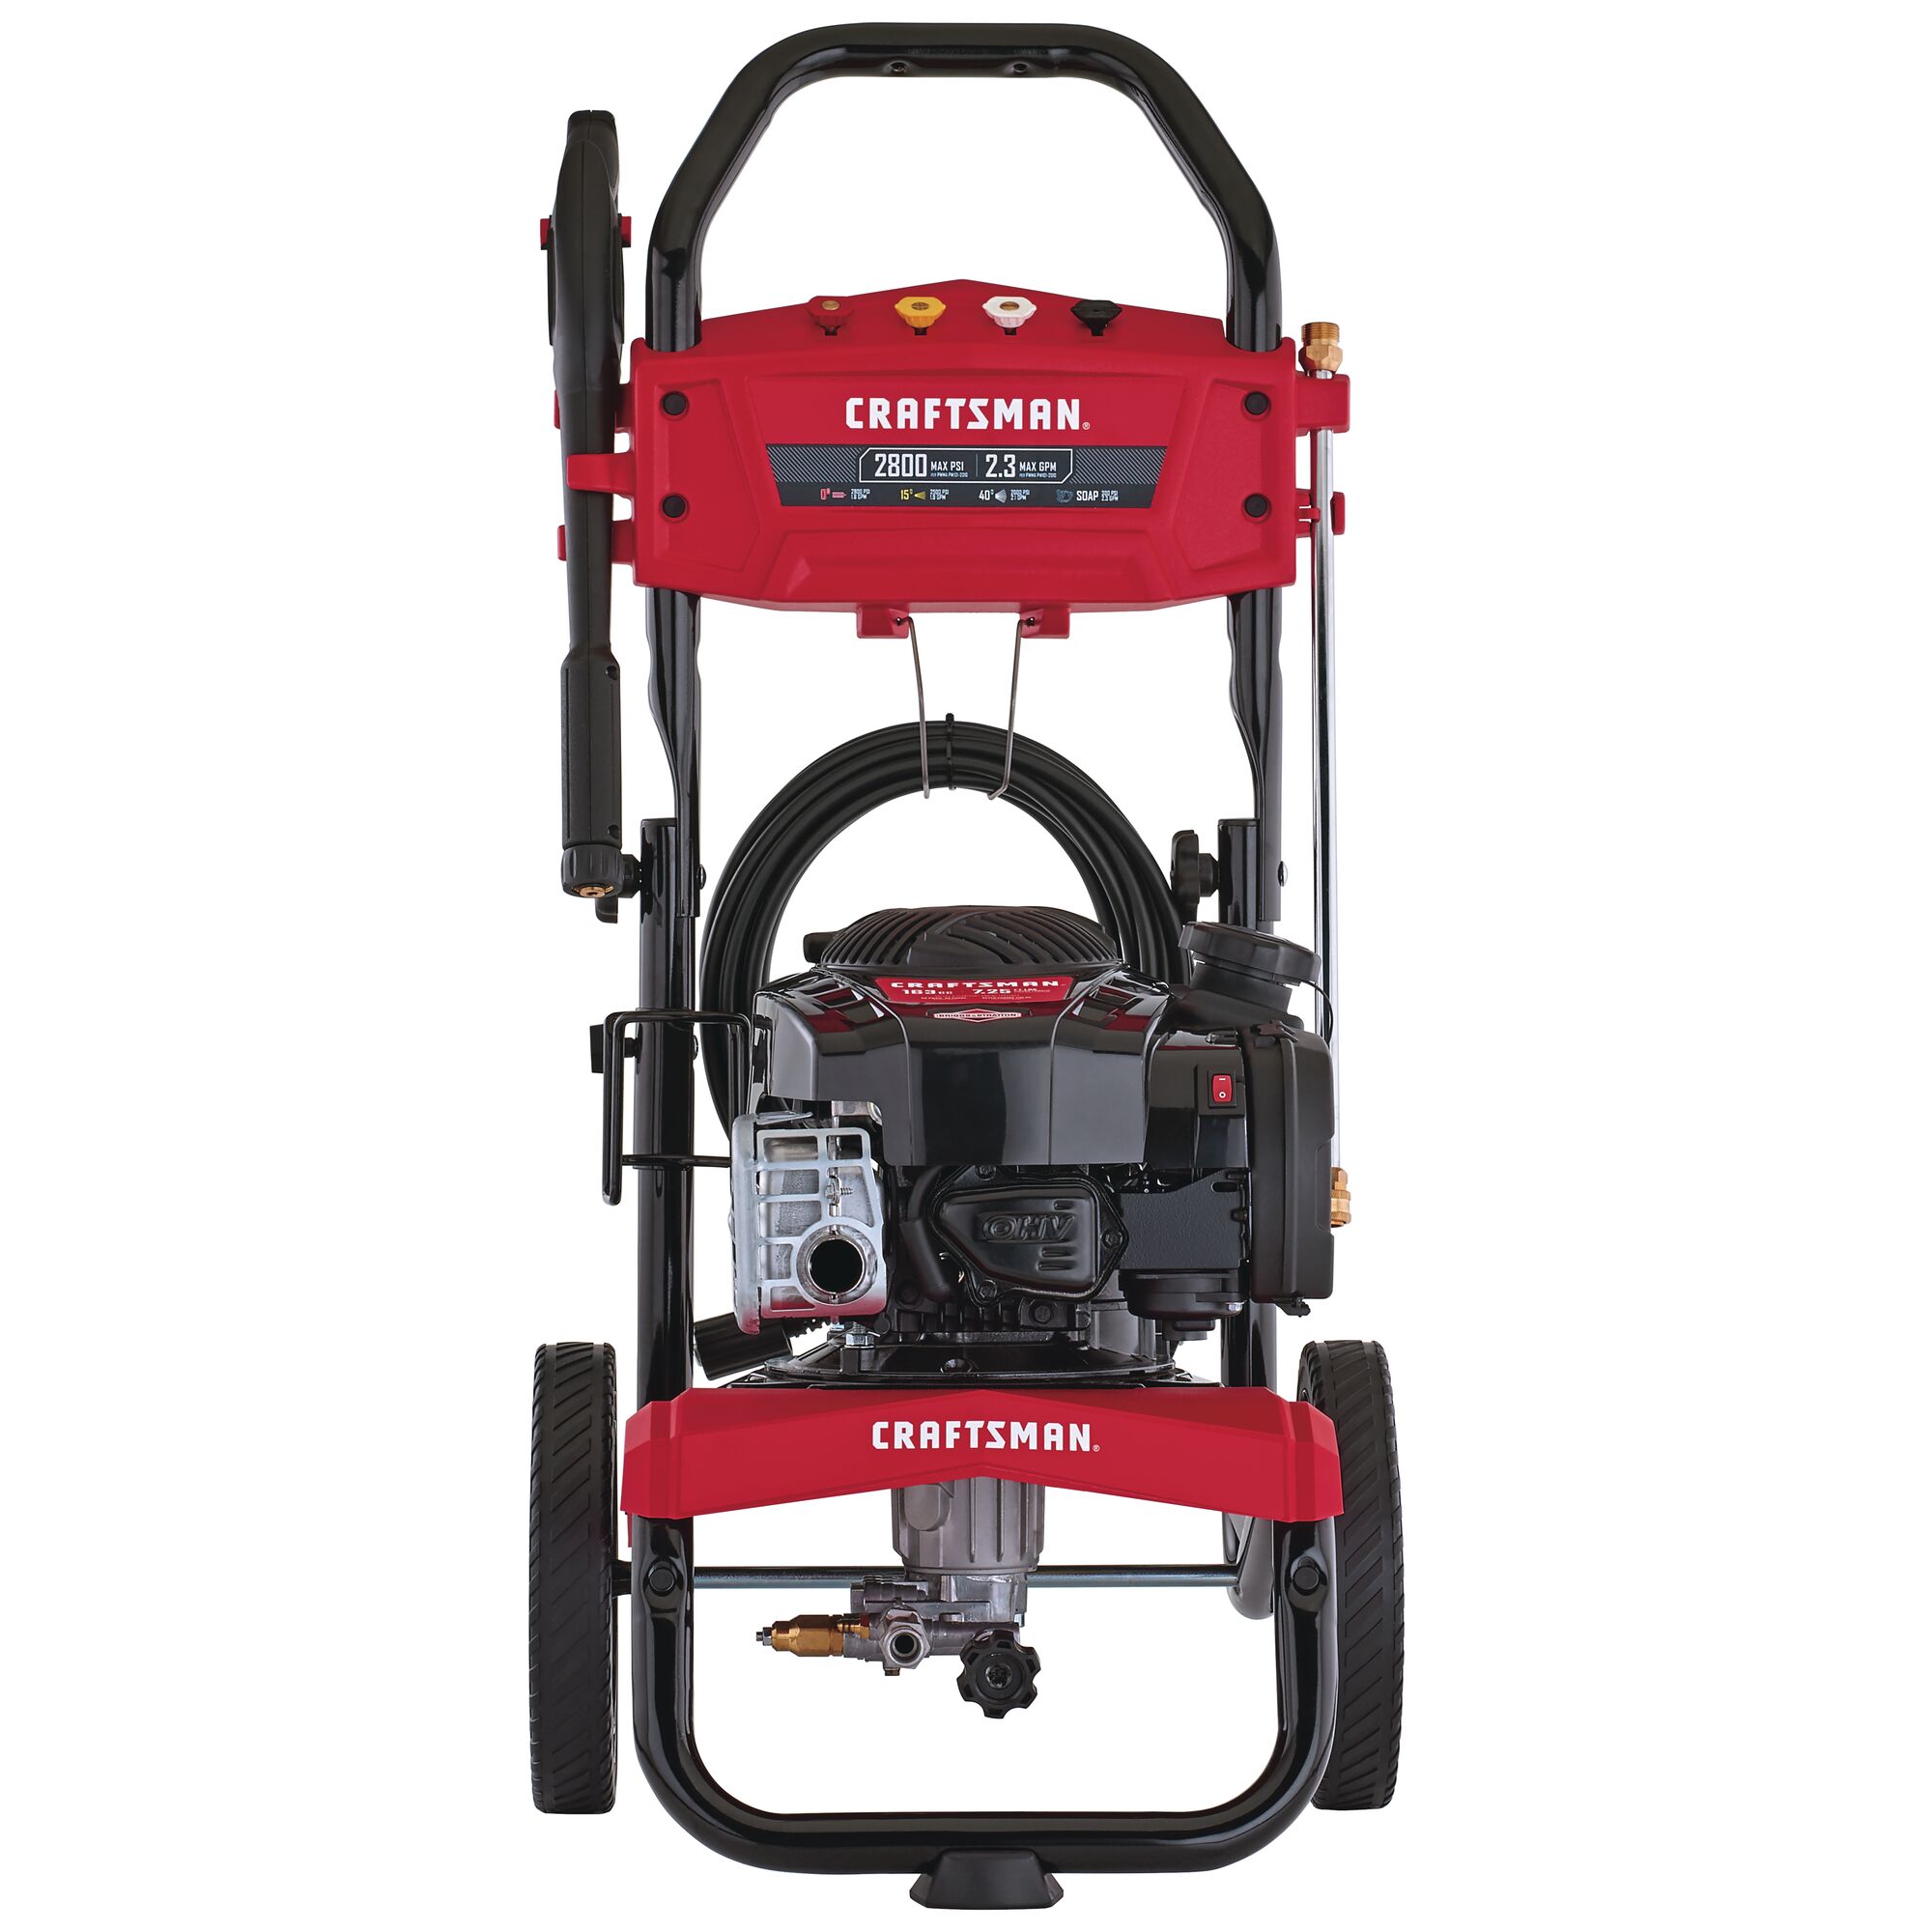 2800 MAX Pounds per Square Inch or 2 and three tenths MAX Gallons Per Minute Pressure Washer.